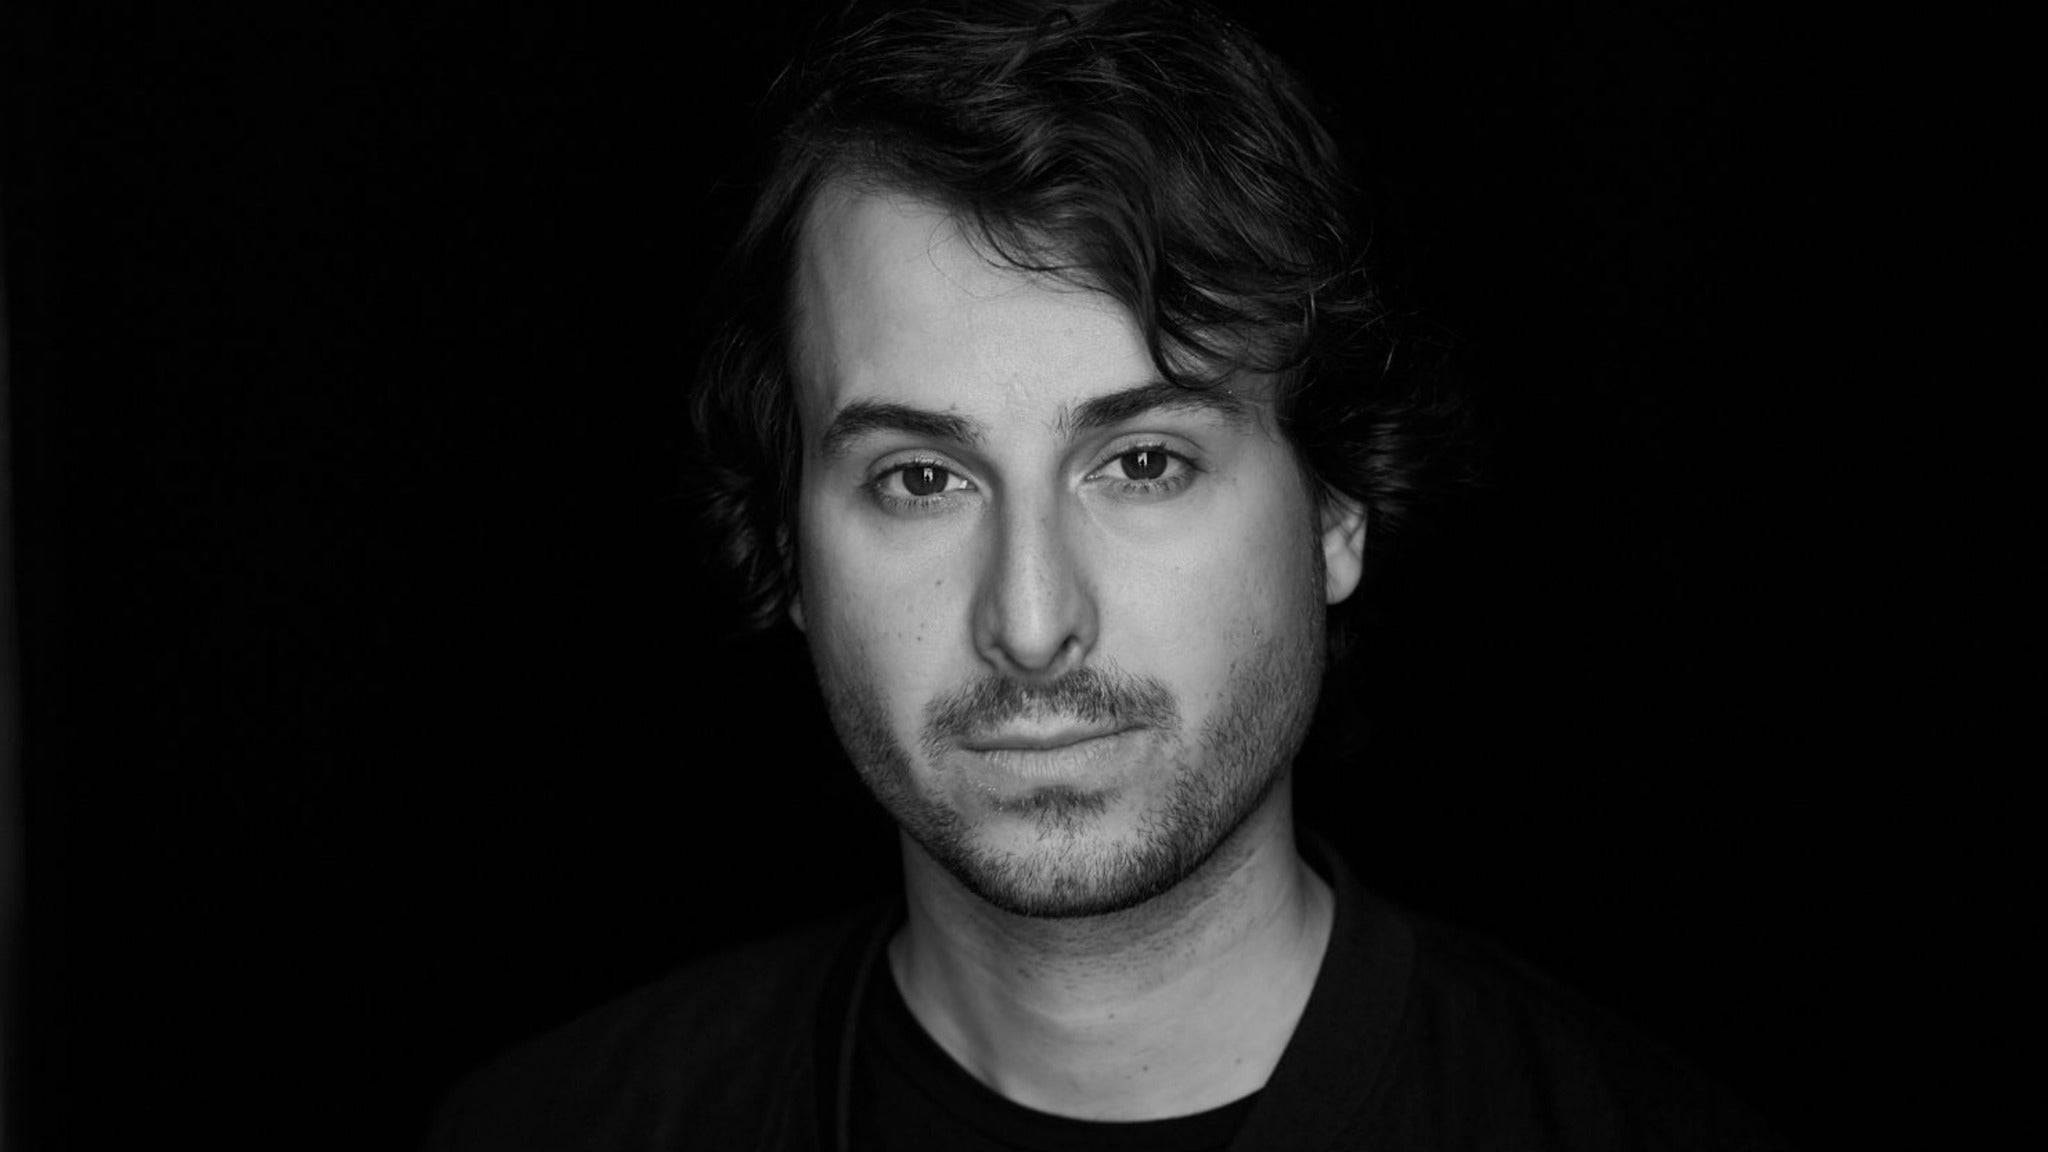 presale code for Bobby Bazini advanced tickets in Toronto at TD Music Hall - Allied Music Centre